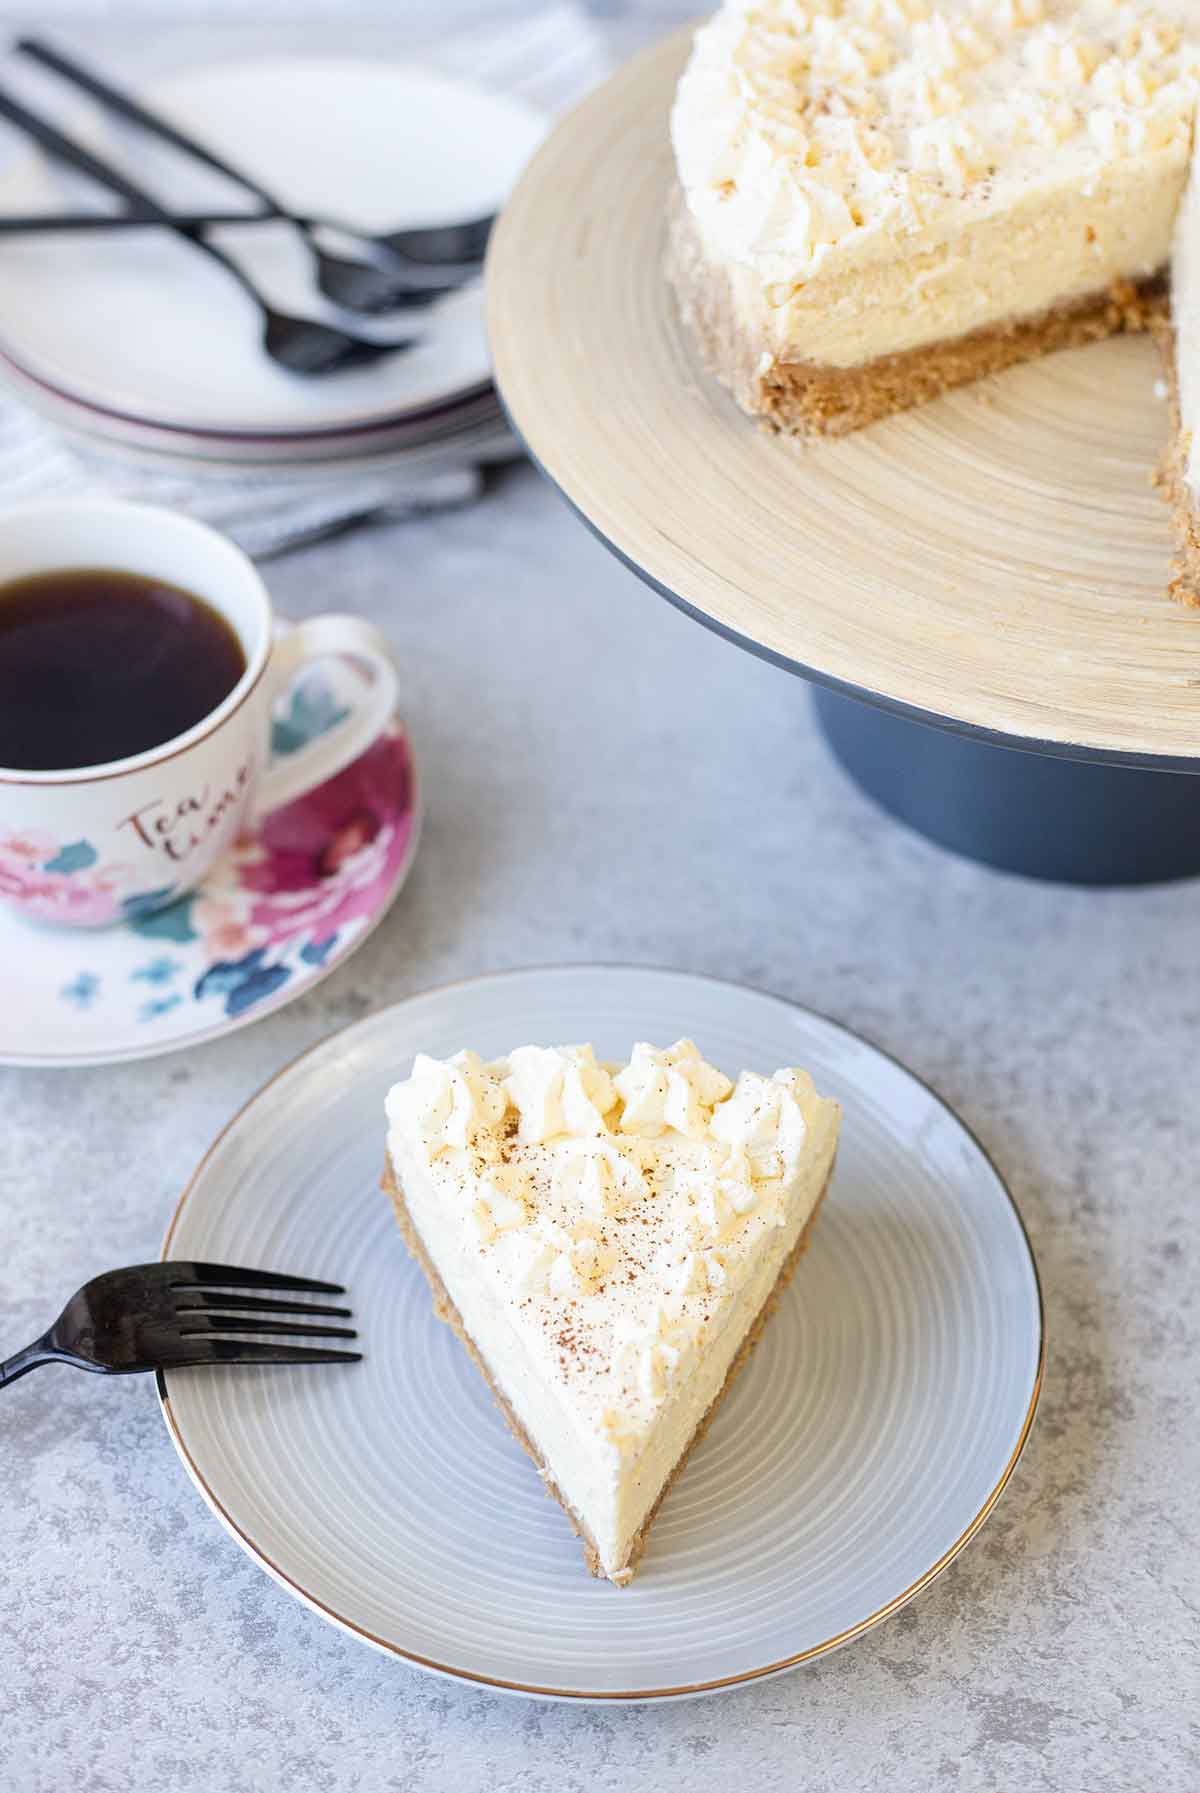 A slice of the eggnog cheesecake is in a plate and a cup of tea next to it.